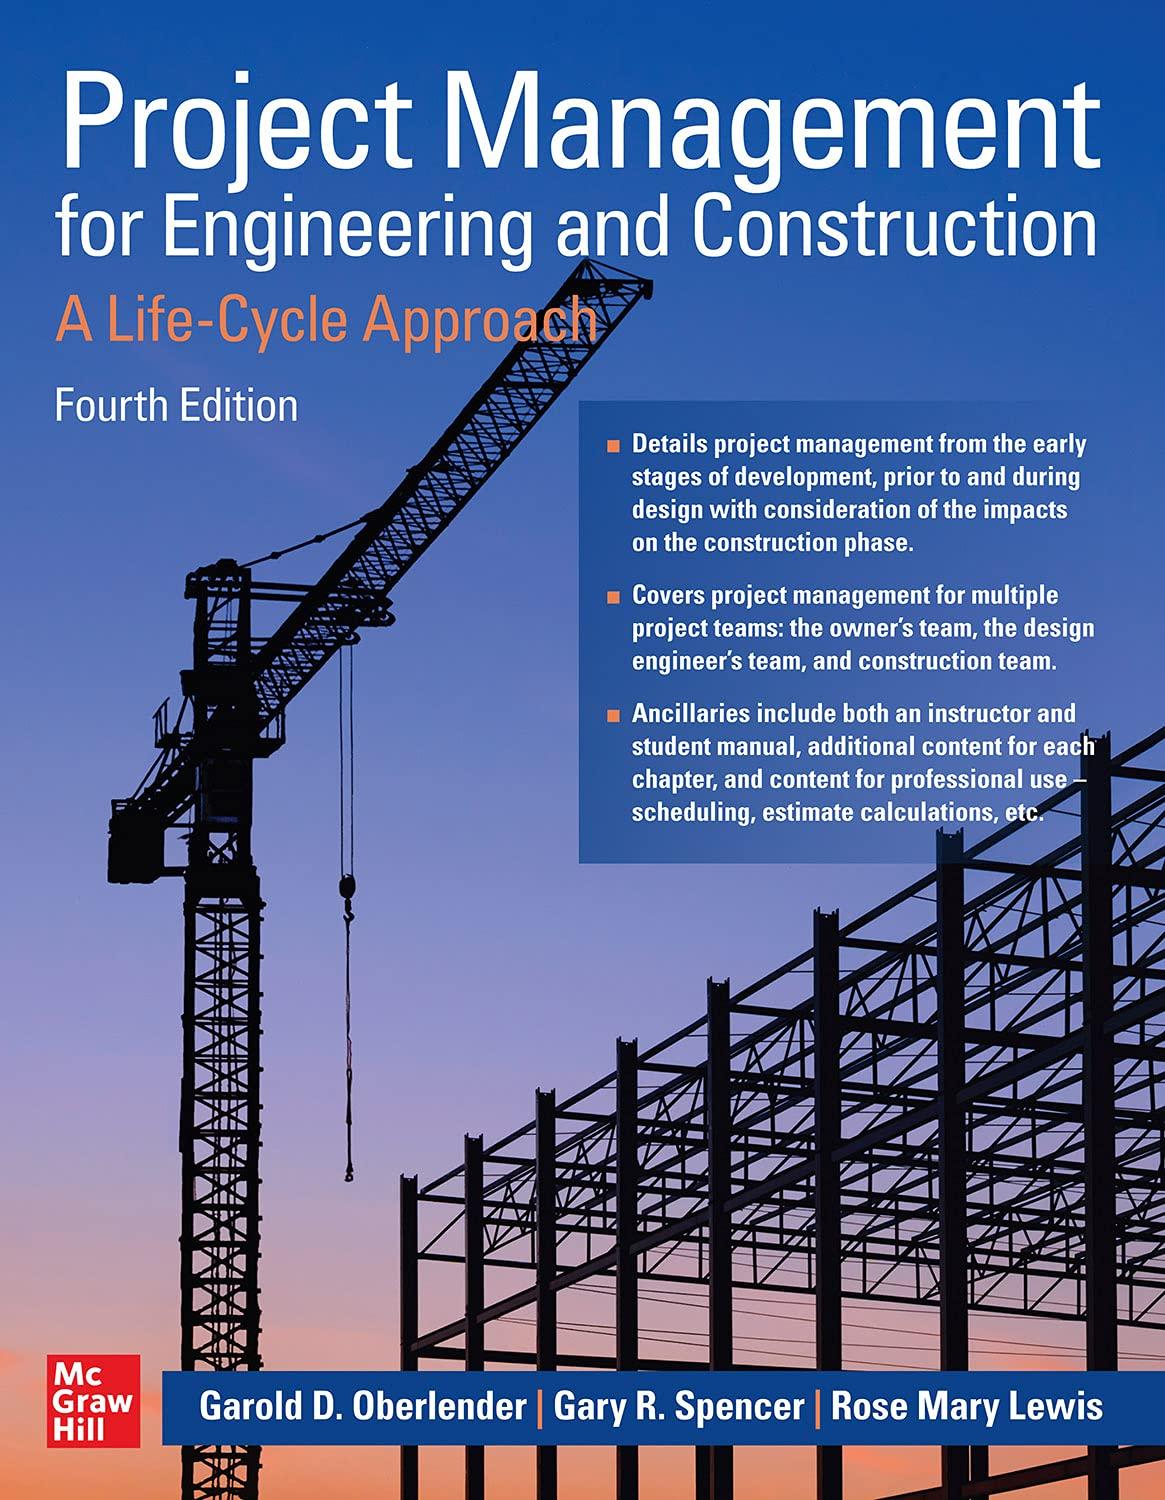 project management for engineering and construction a life cycle approach 4th edition garold oberlender, gary